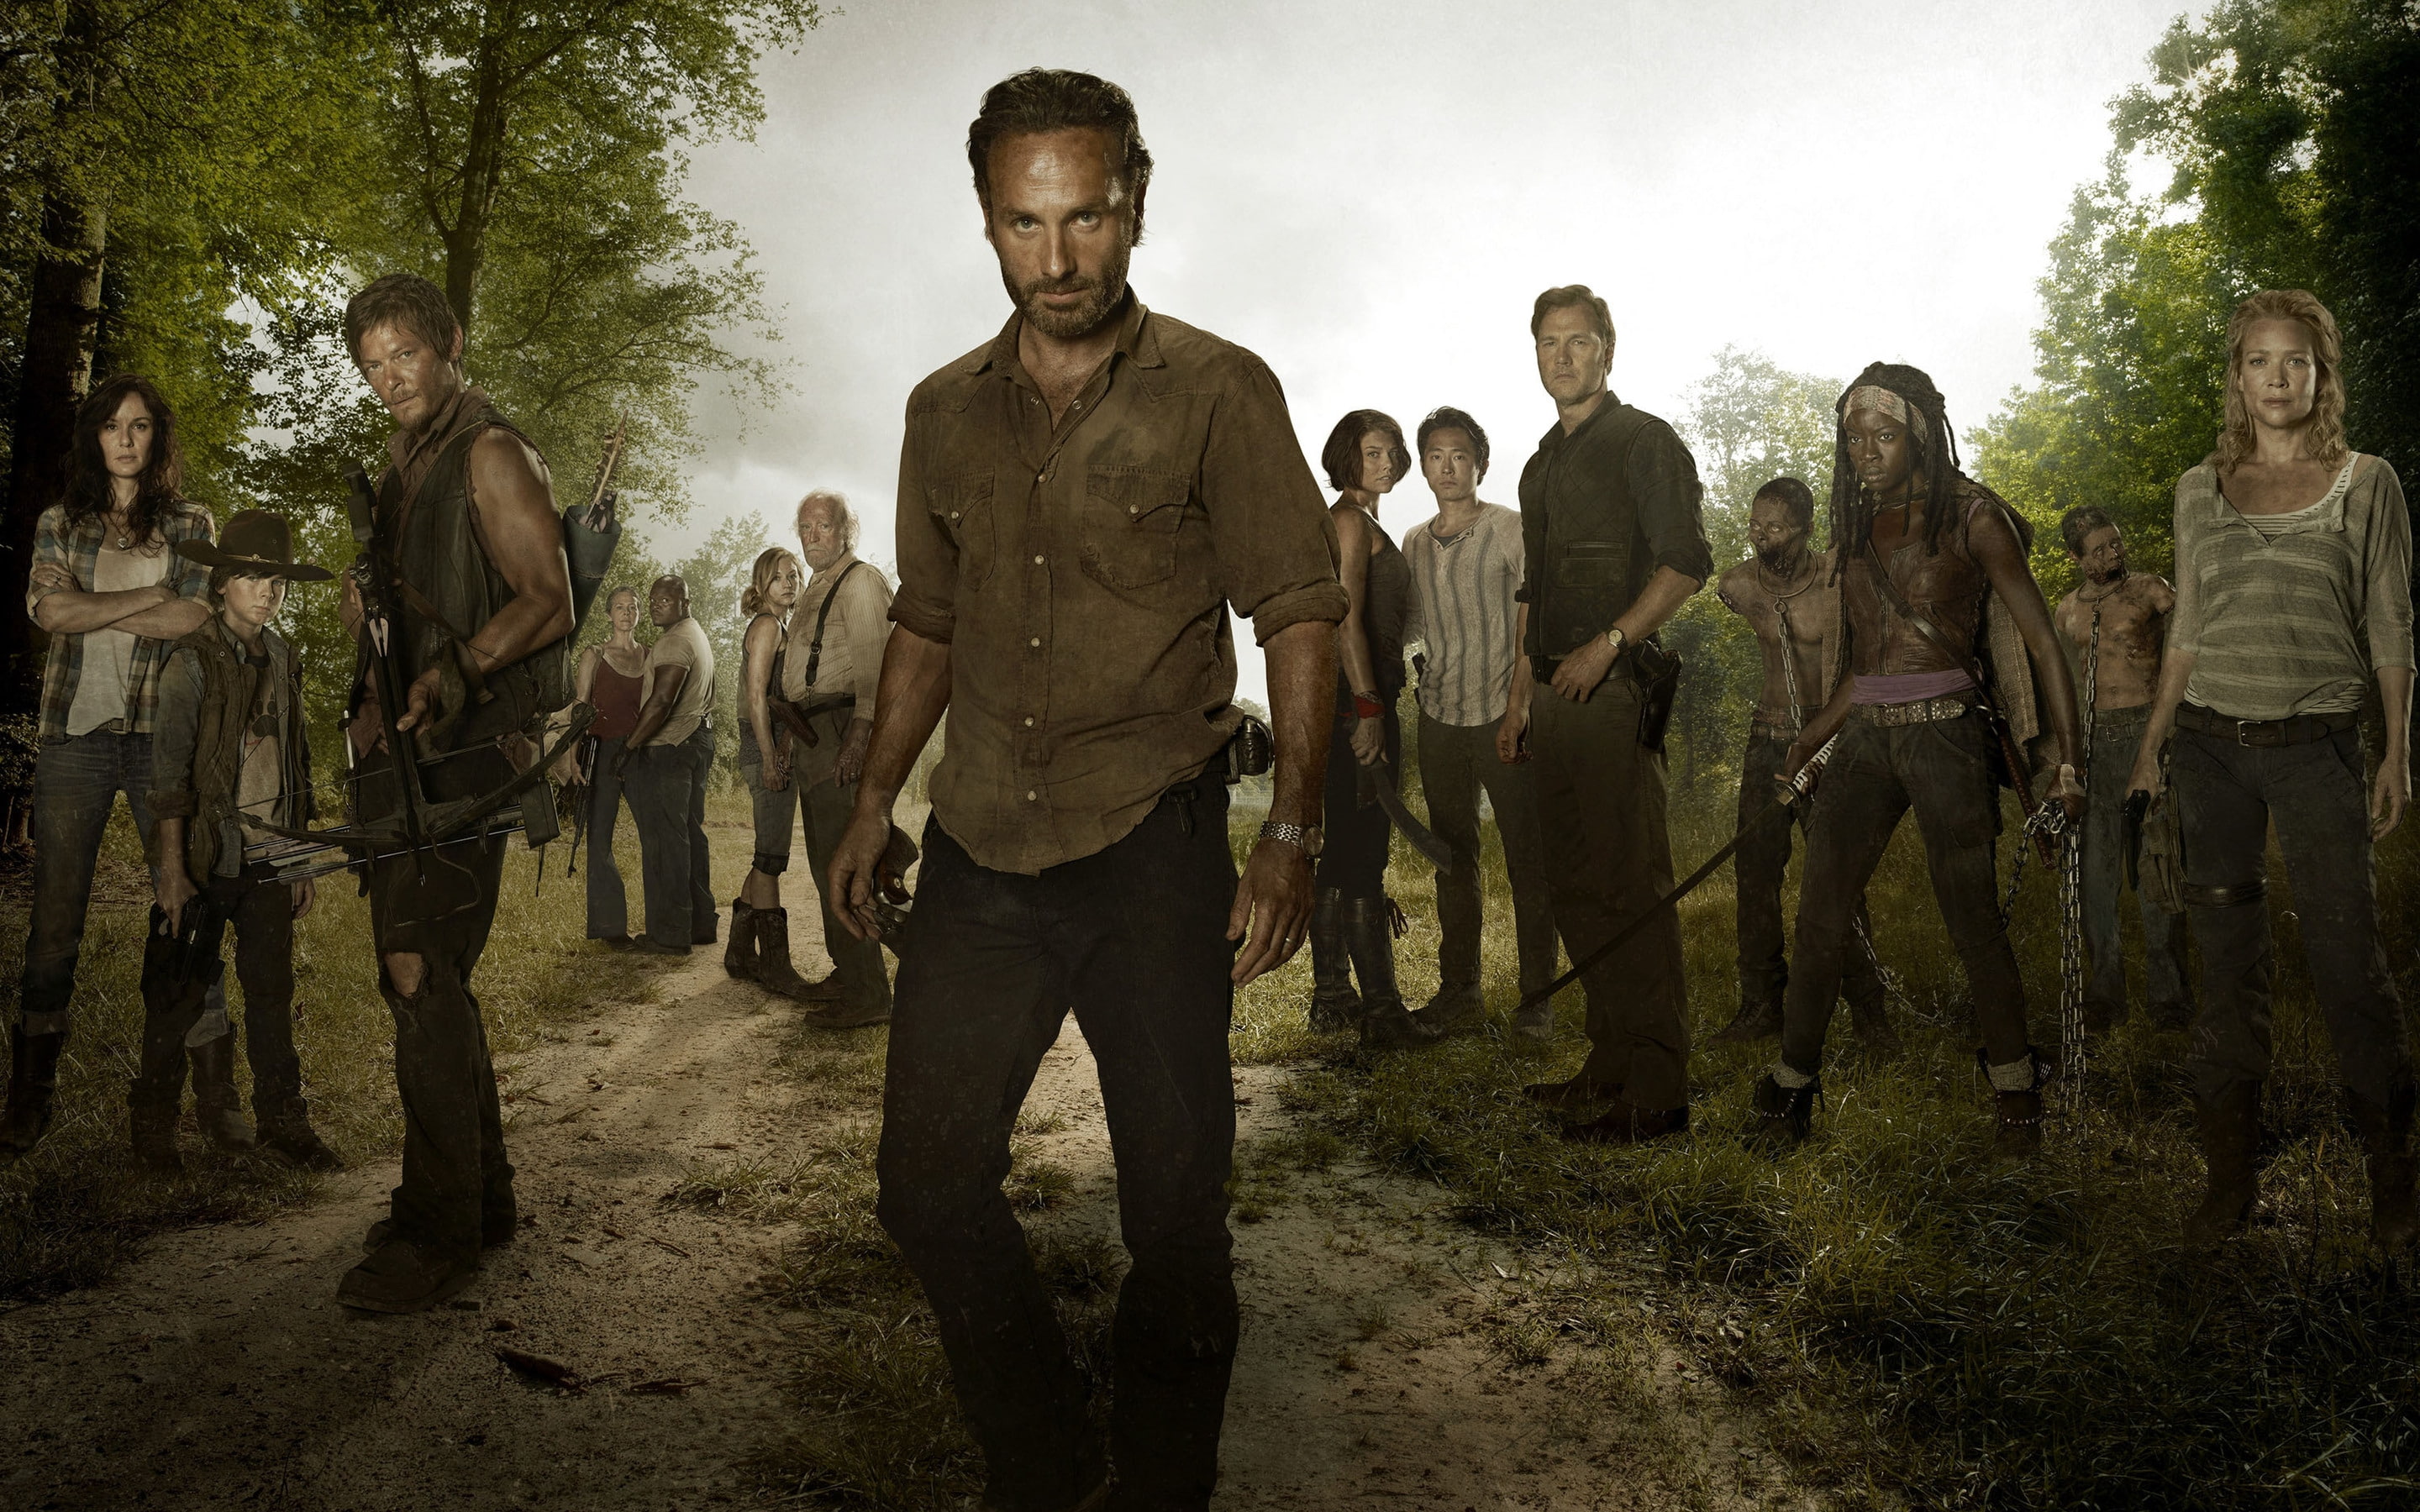 The Walking Dead Full Cast, the walking dead cast, poster, action